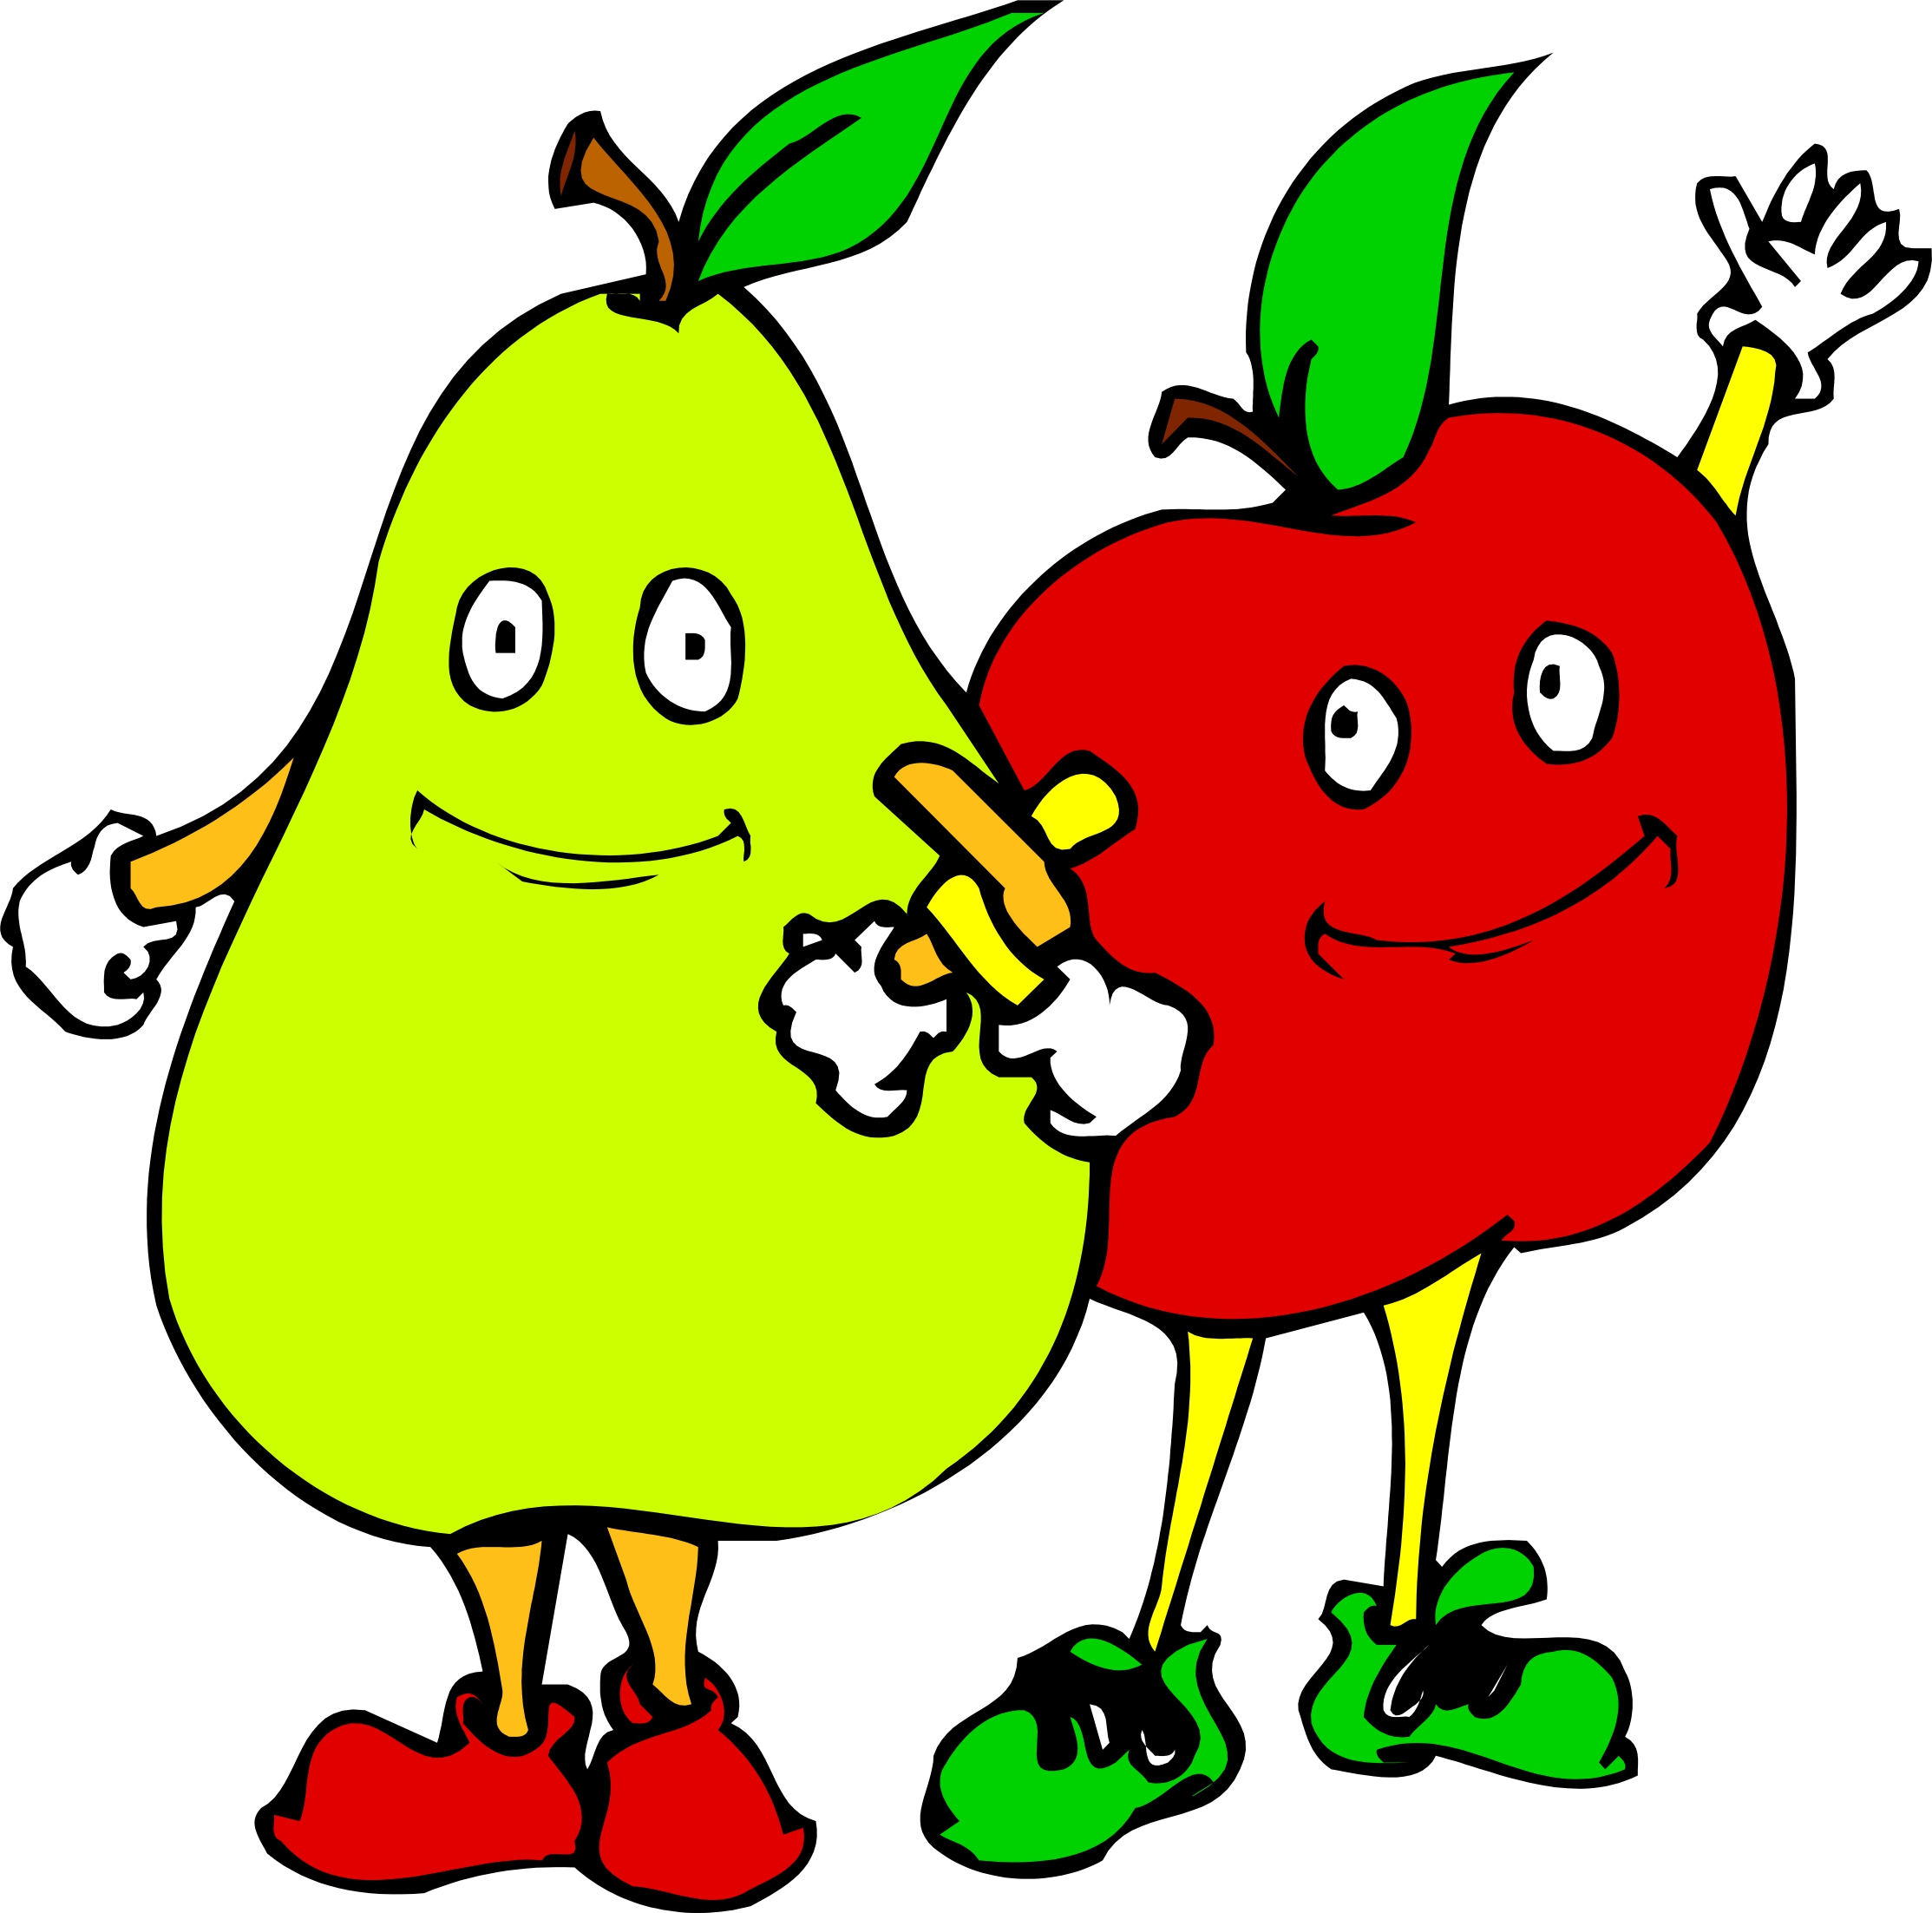 10 Fruits Cartoon Pictures   Free Cliparts That You Can Download To